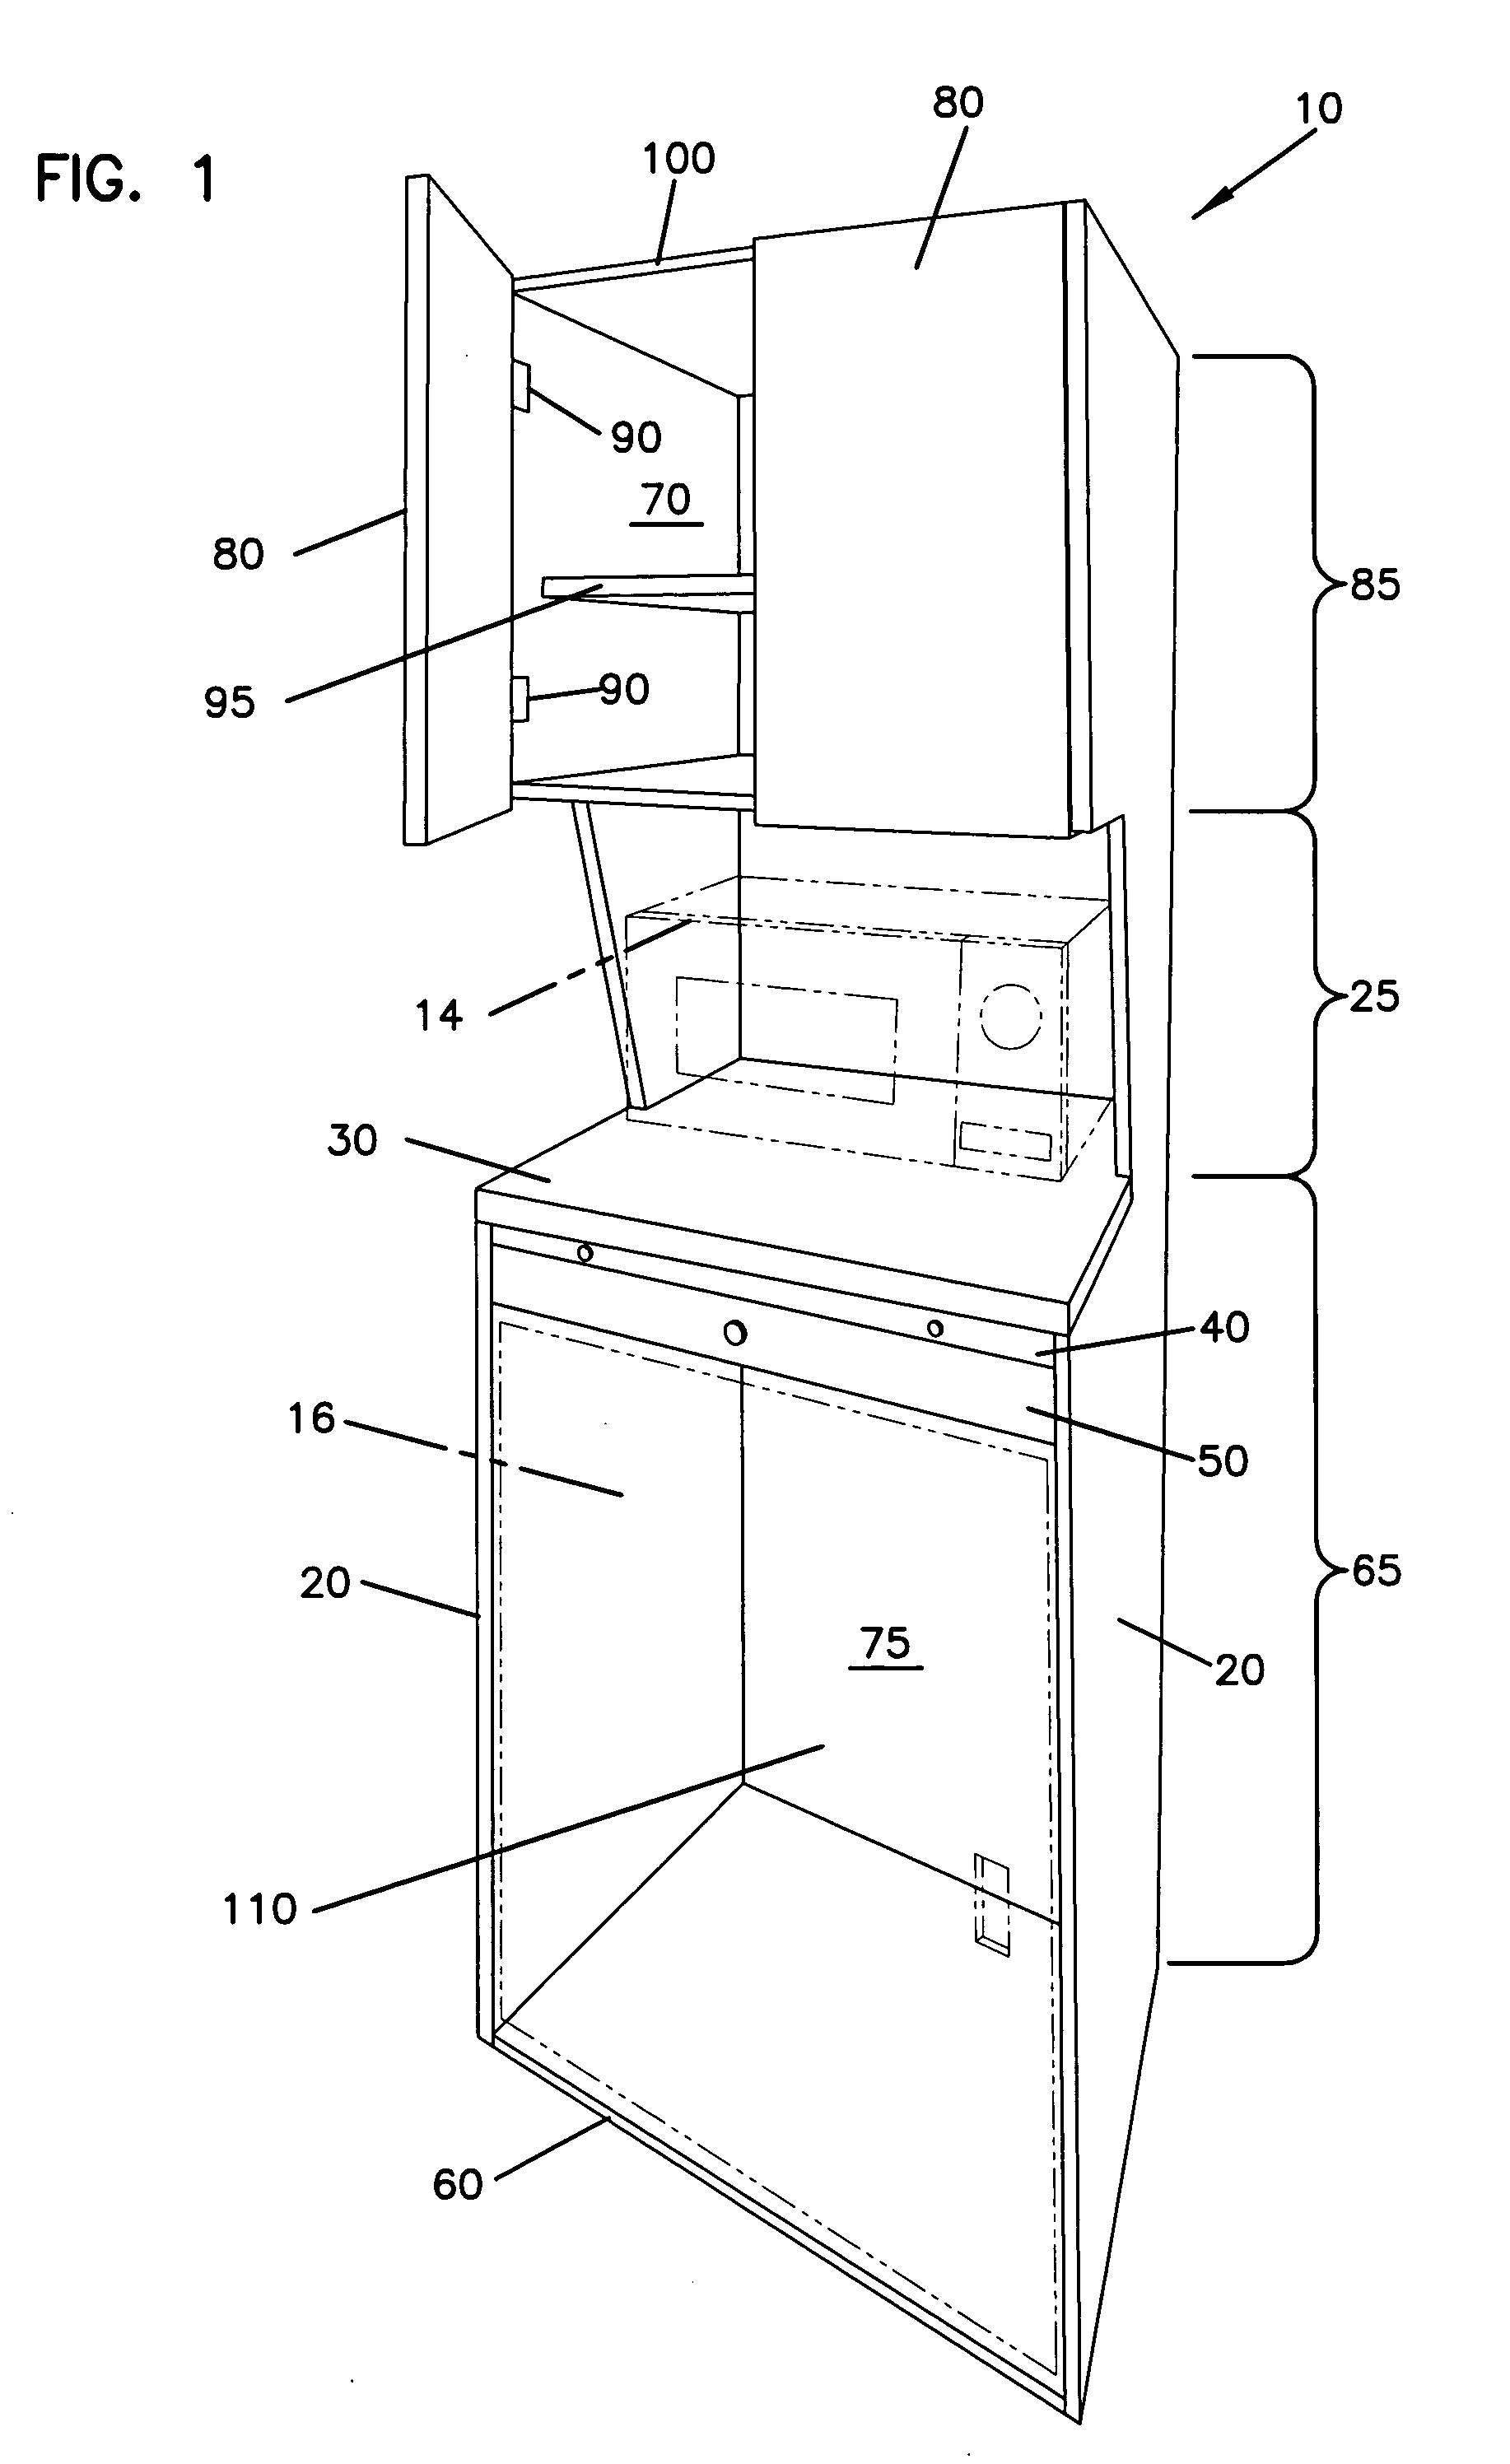 Cabinet apparatus for kitchen utensils and appliances